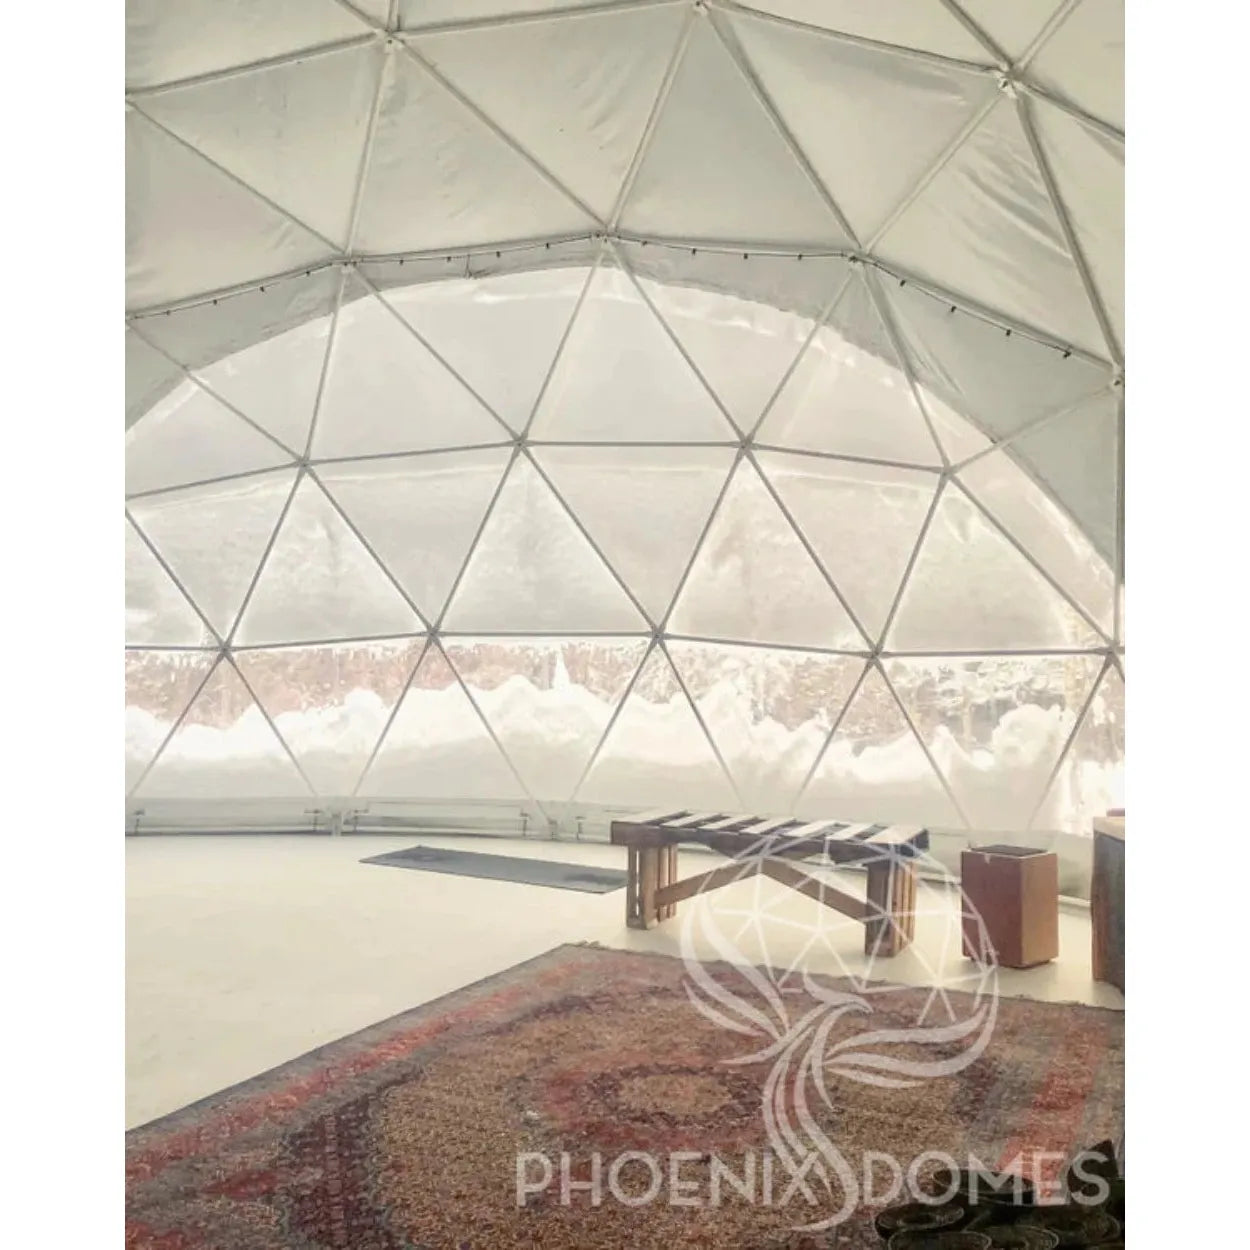 4-season-deluxe-glamping-yoga-package-dome-30-9m-301